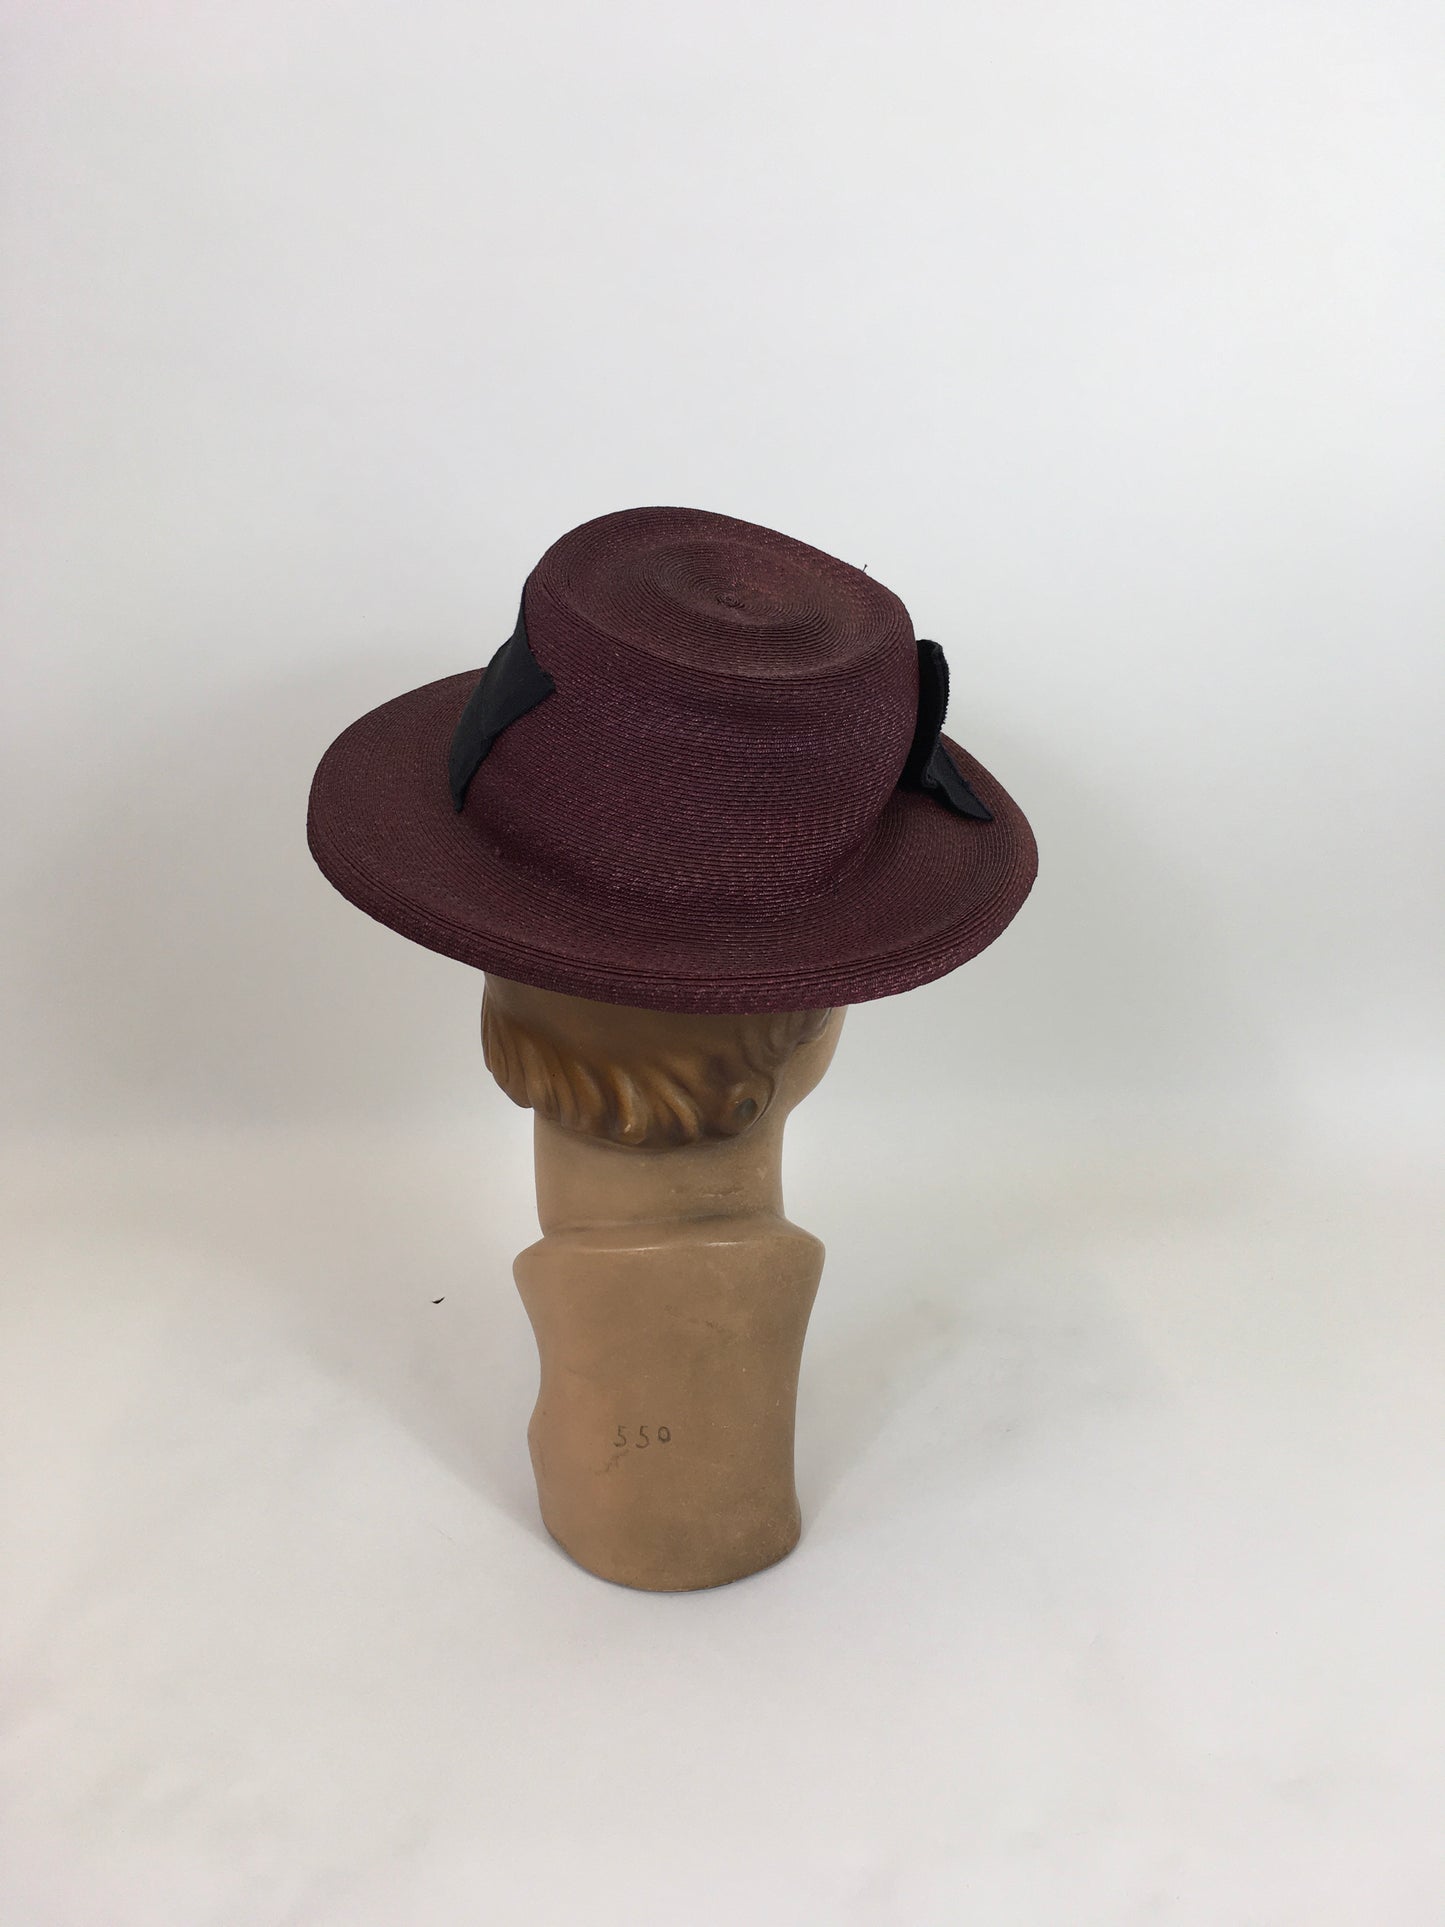 Original 1940’s Sublime Straw Tilt Hat - In A Deep Mulberry With Trim